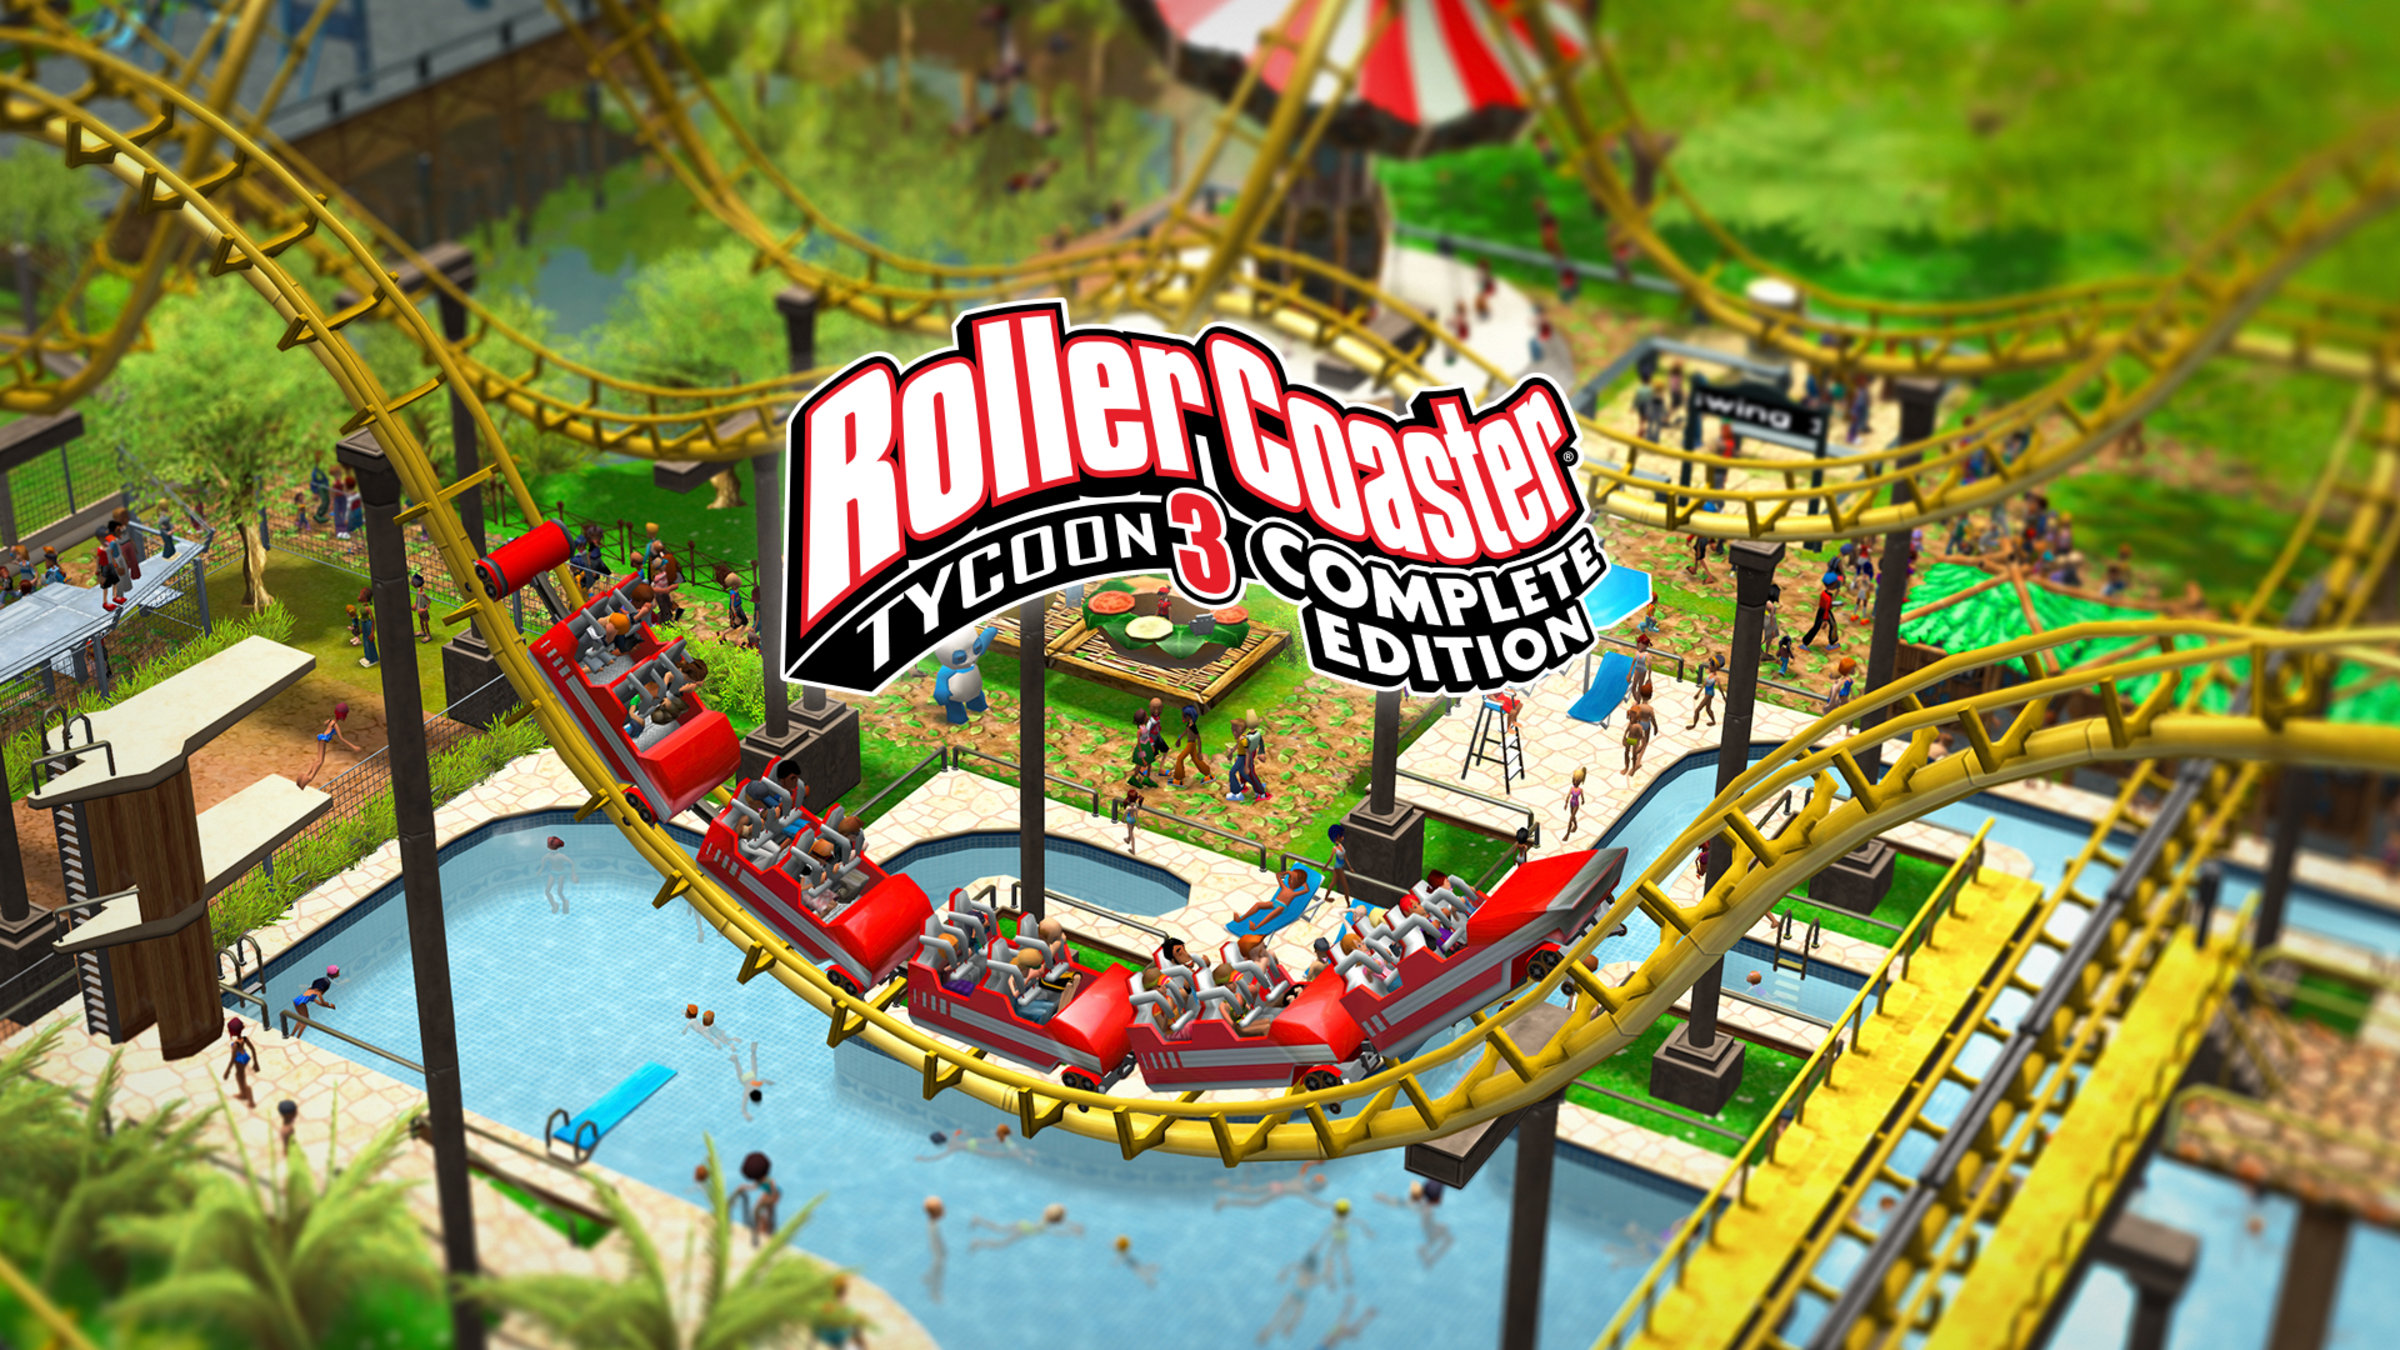 Soaked!, RollerCoaster Tycoon